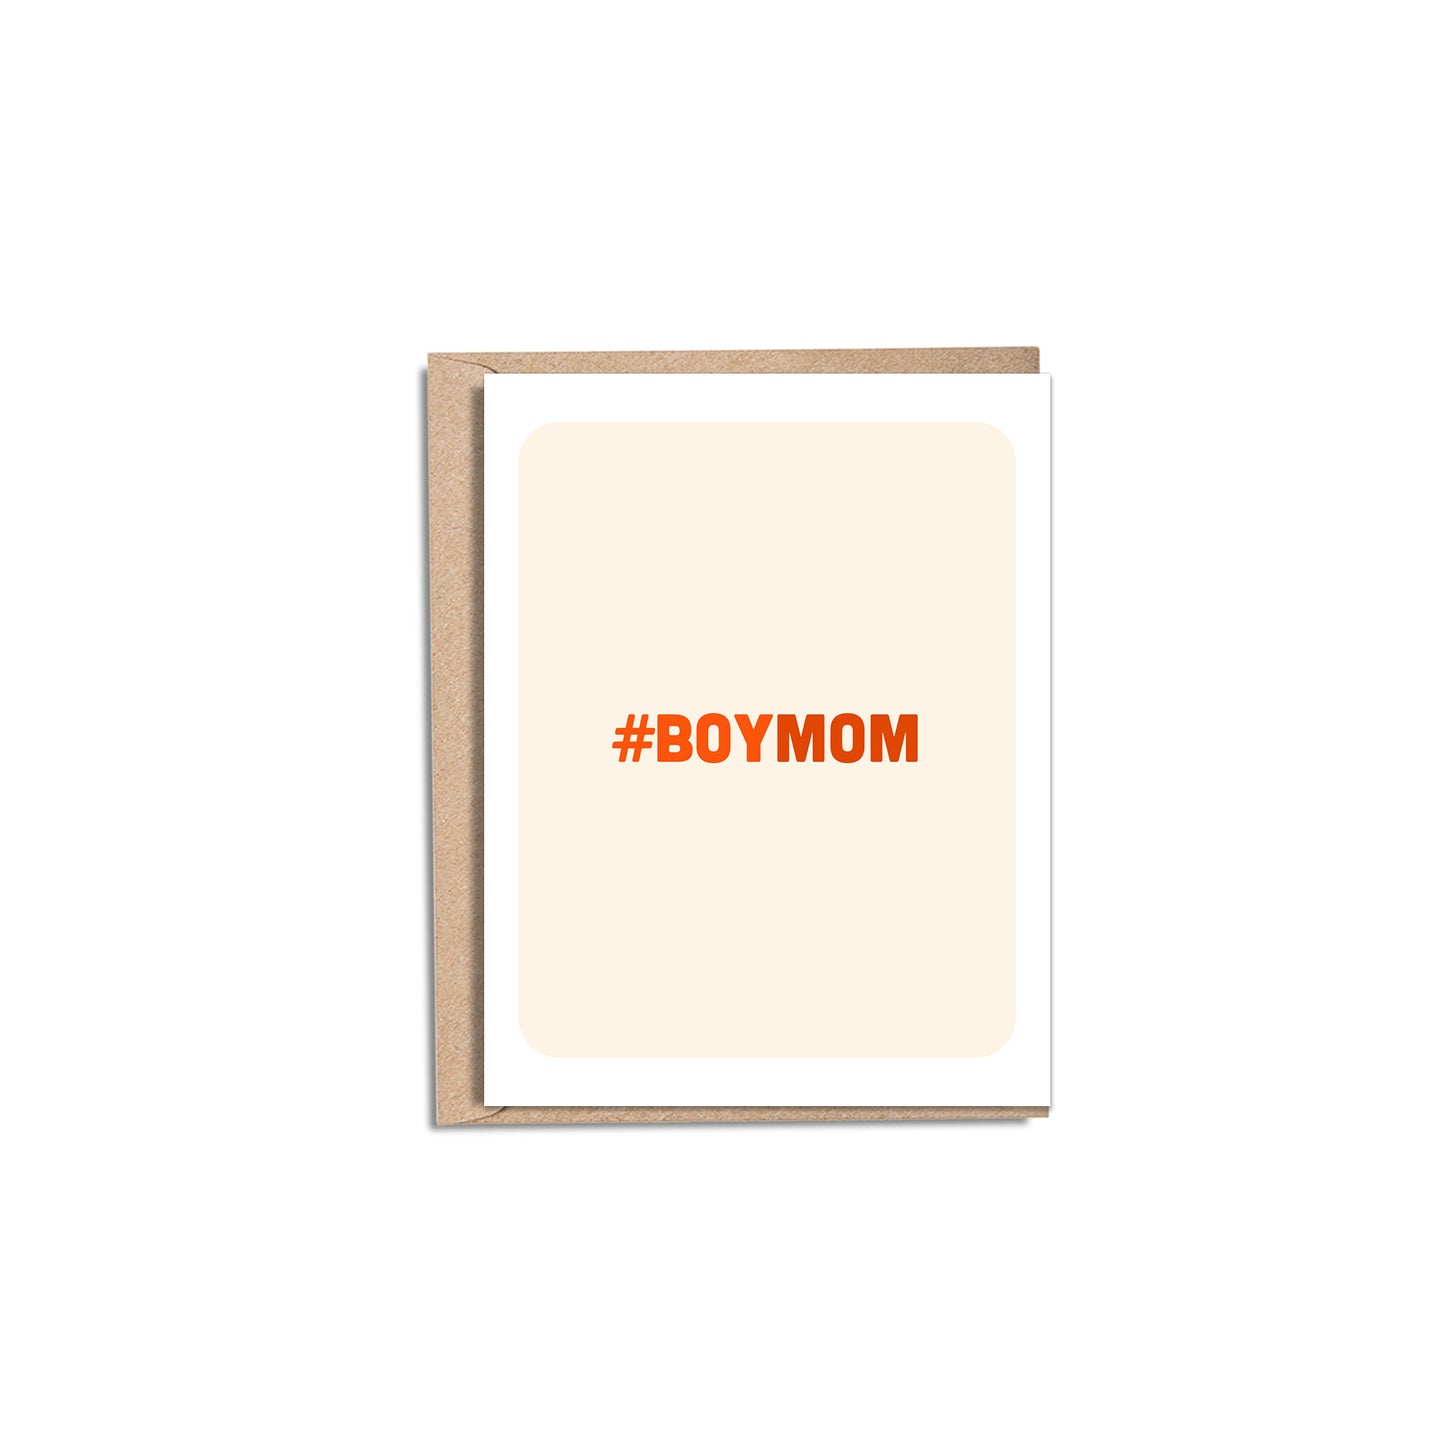 Boy Mom 4.25x5.5” A2 New parents, expecting mom, baby shower greeting cards from Goods Made By Digitrillnana, Ashley Fletcher. Black Woman Owned. Perfect baby shower, new mom, mothers day card!